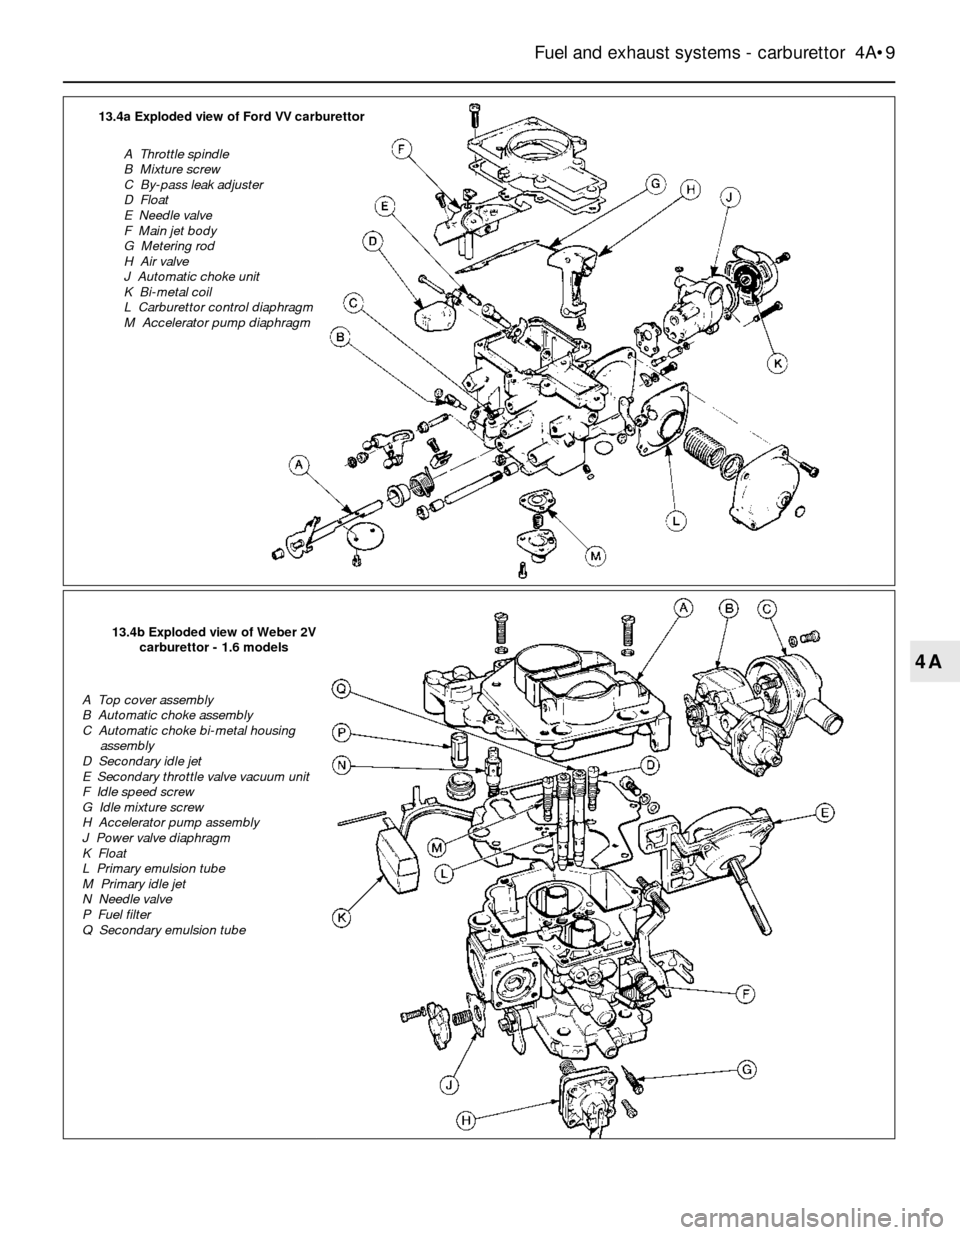 FORD SIERRA 1988 2.G Fuel And Exhaust Systems Carburettor Workshop Manual Fuel and exhaust systems - carburettor  4A•9
4A
13.4a Exploded view of Ford VV carburettor
A  Throttle spindle
B  Mixture screw
C  By-pass leak adjuster
D  Float
E  Needle valve
F  Main jet body
G  